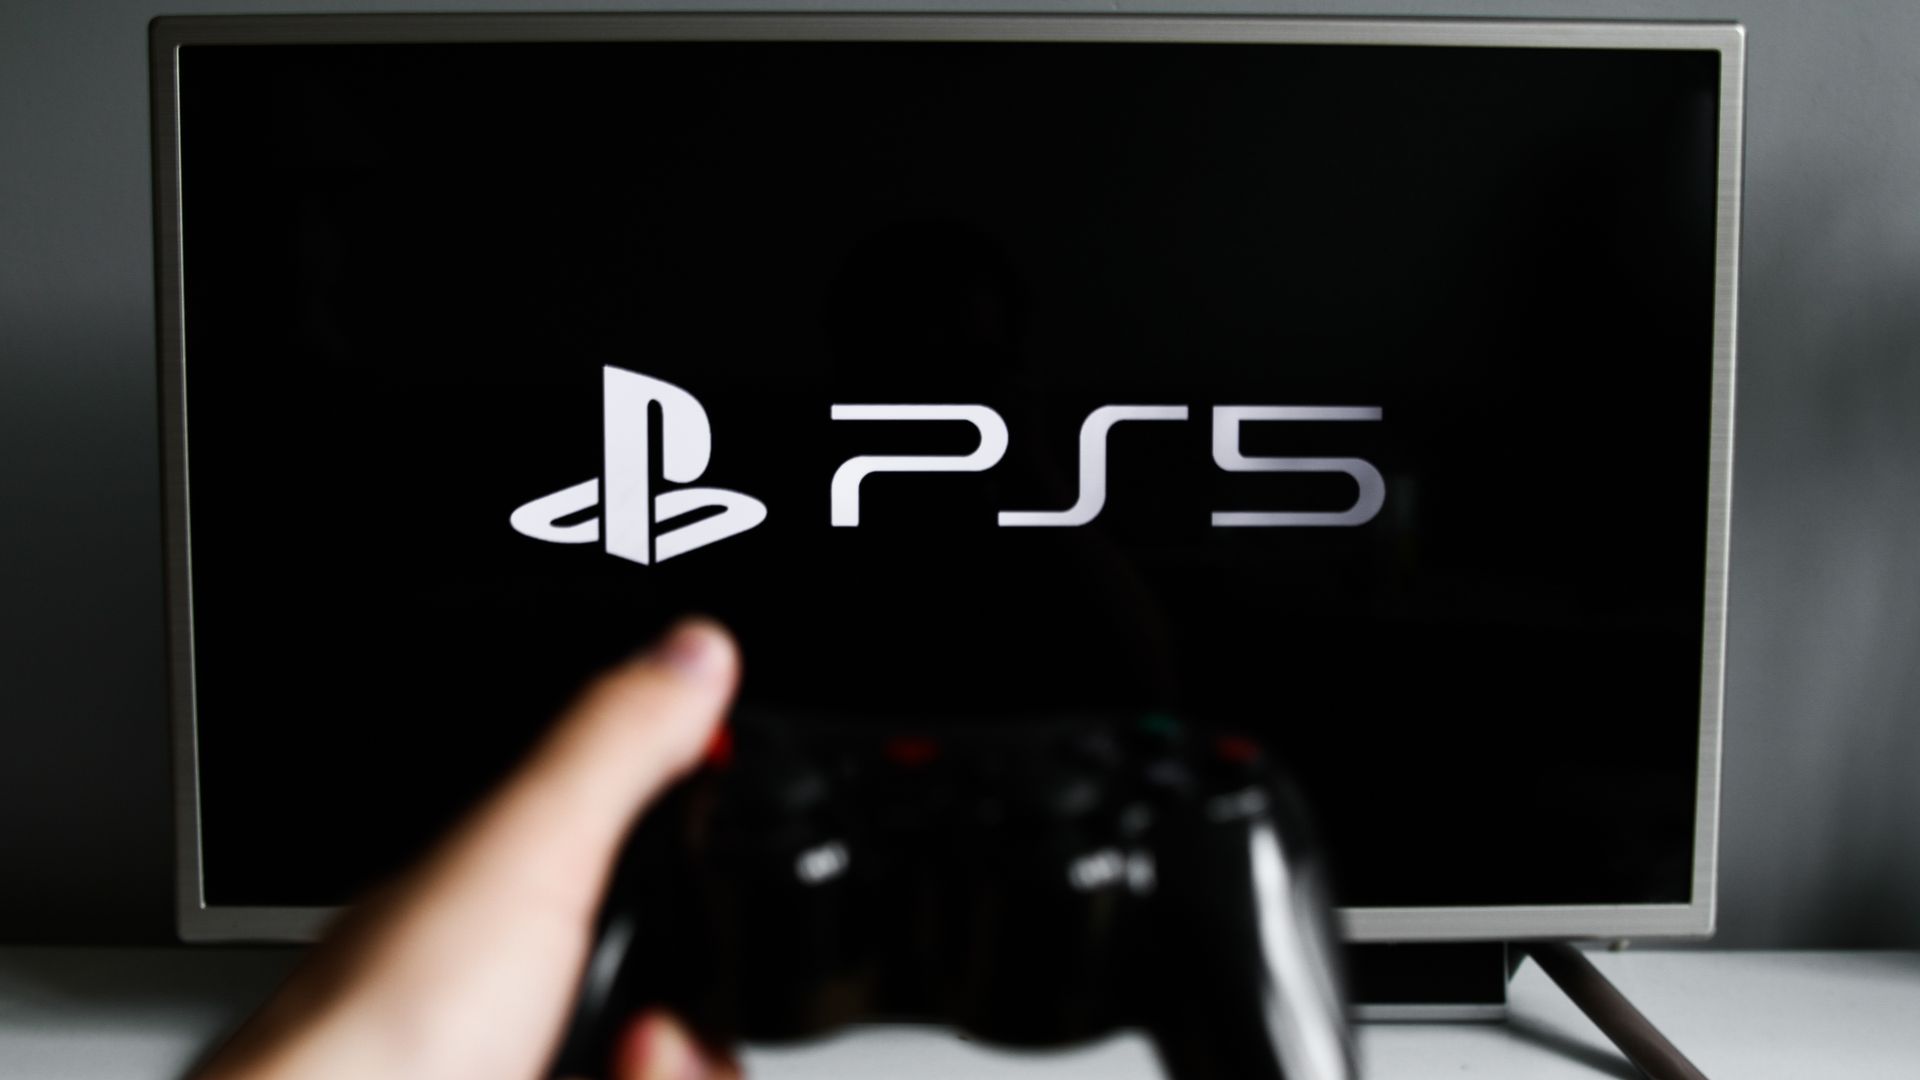 Sony PlayStation 5 image on screen with controller